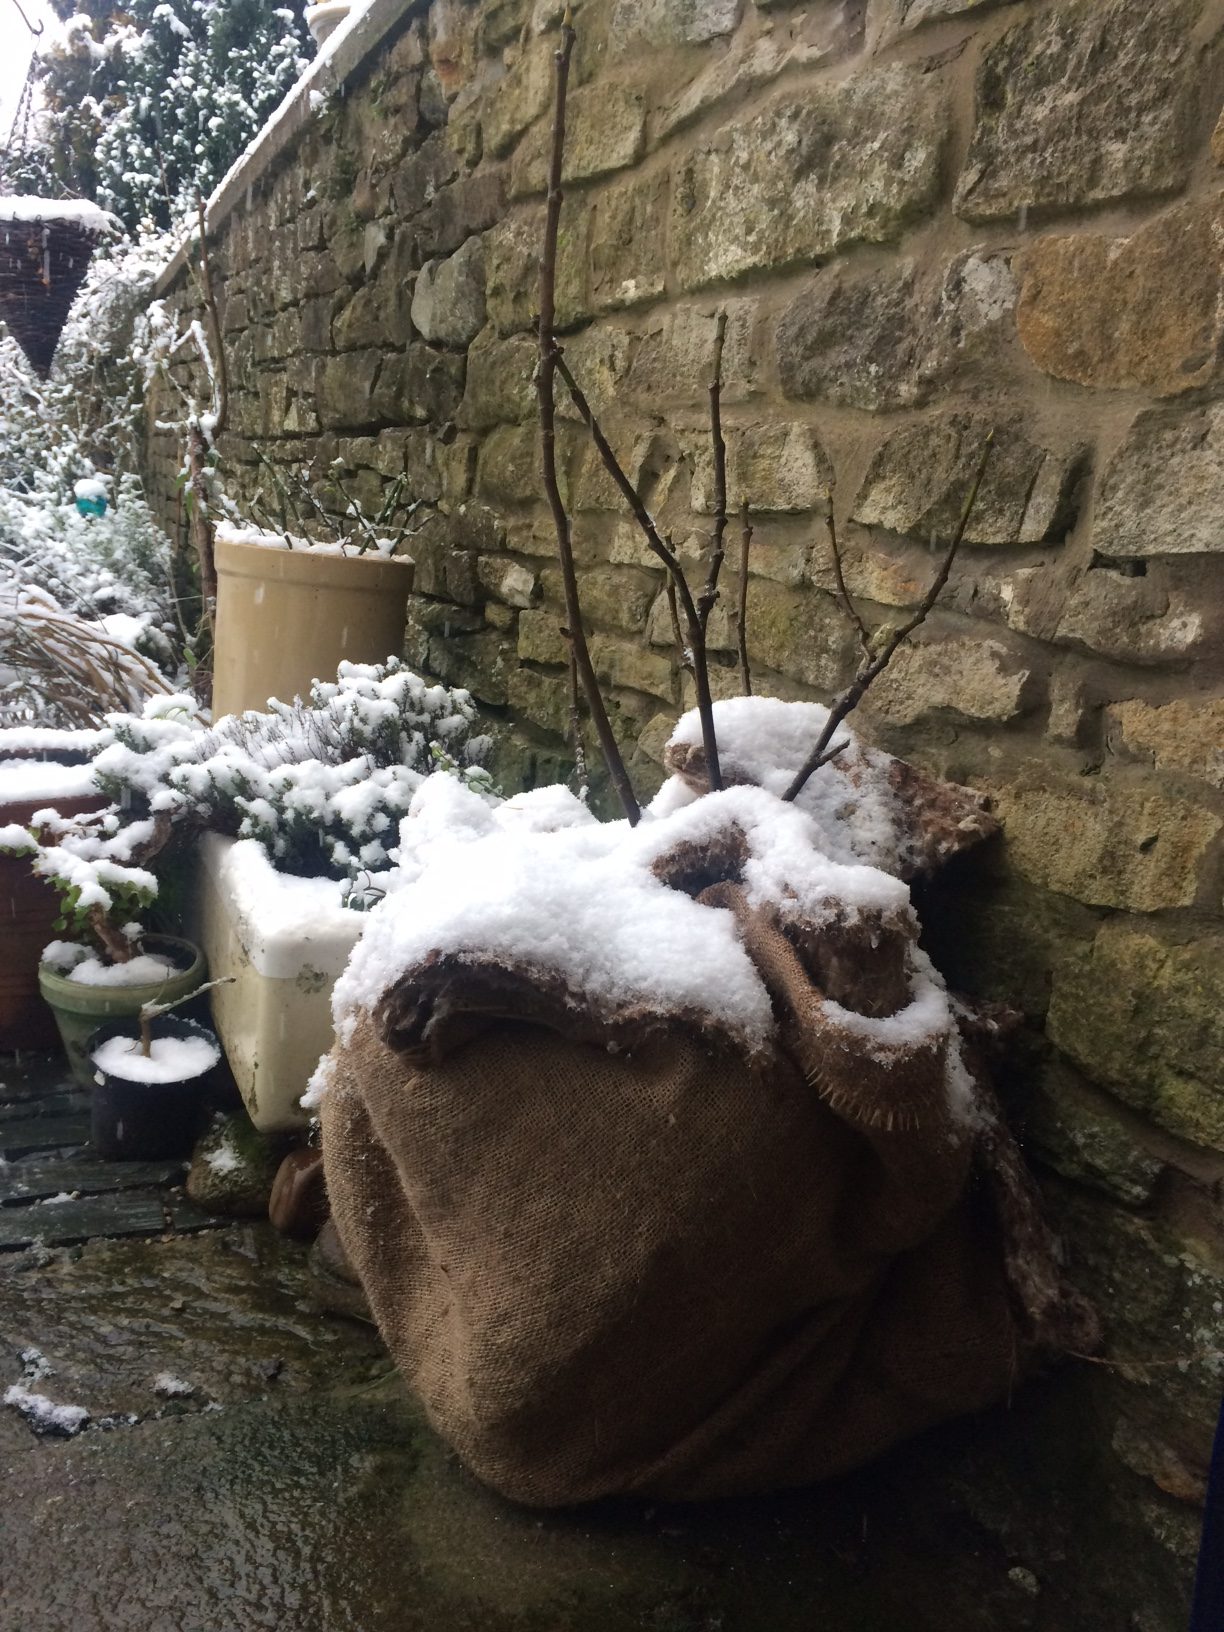 fig tree in pot entirely wrapped in felted sheep wool with dusting of snow on it